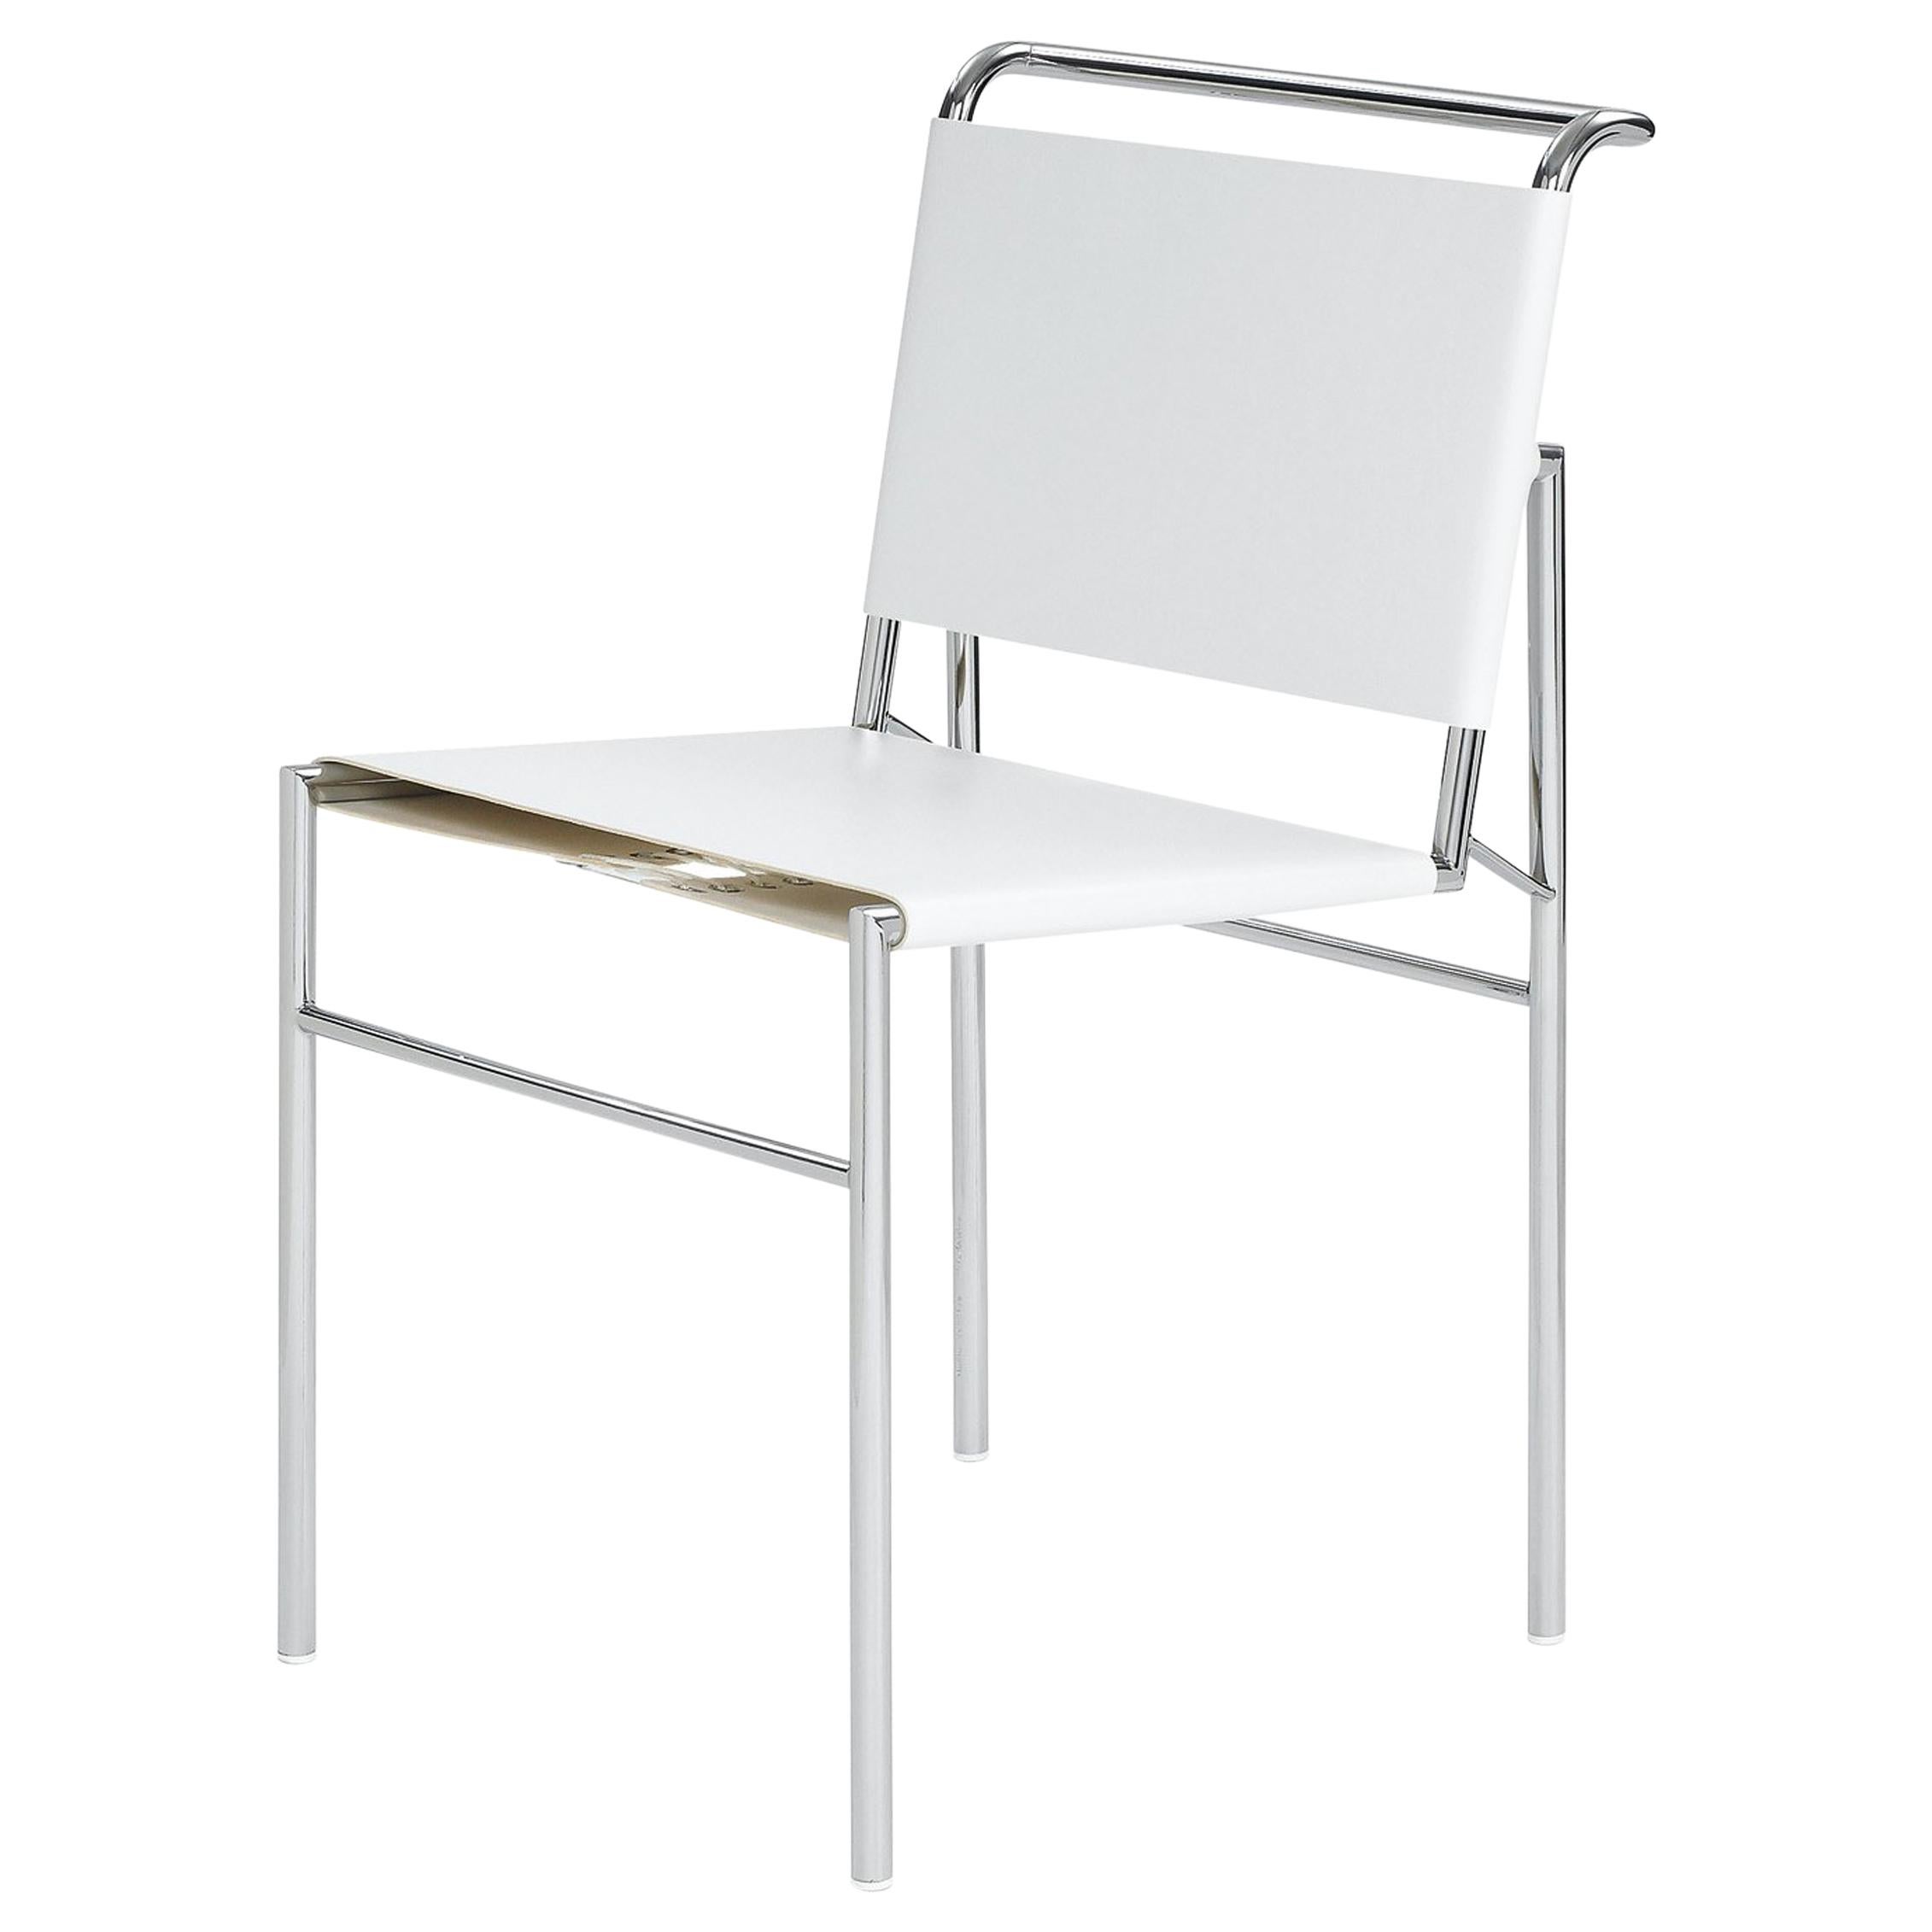 ClassiCon Roquebrune Chair in White with Chrome Legs by Eileen Gray For Sale